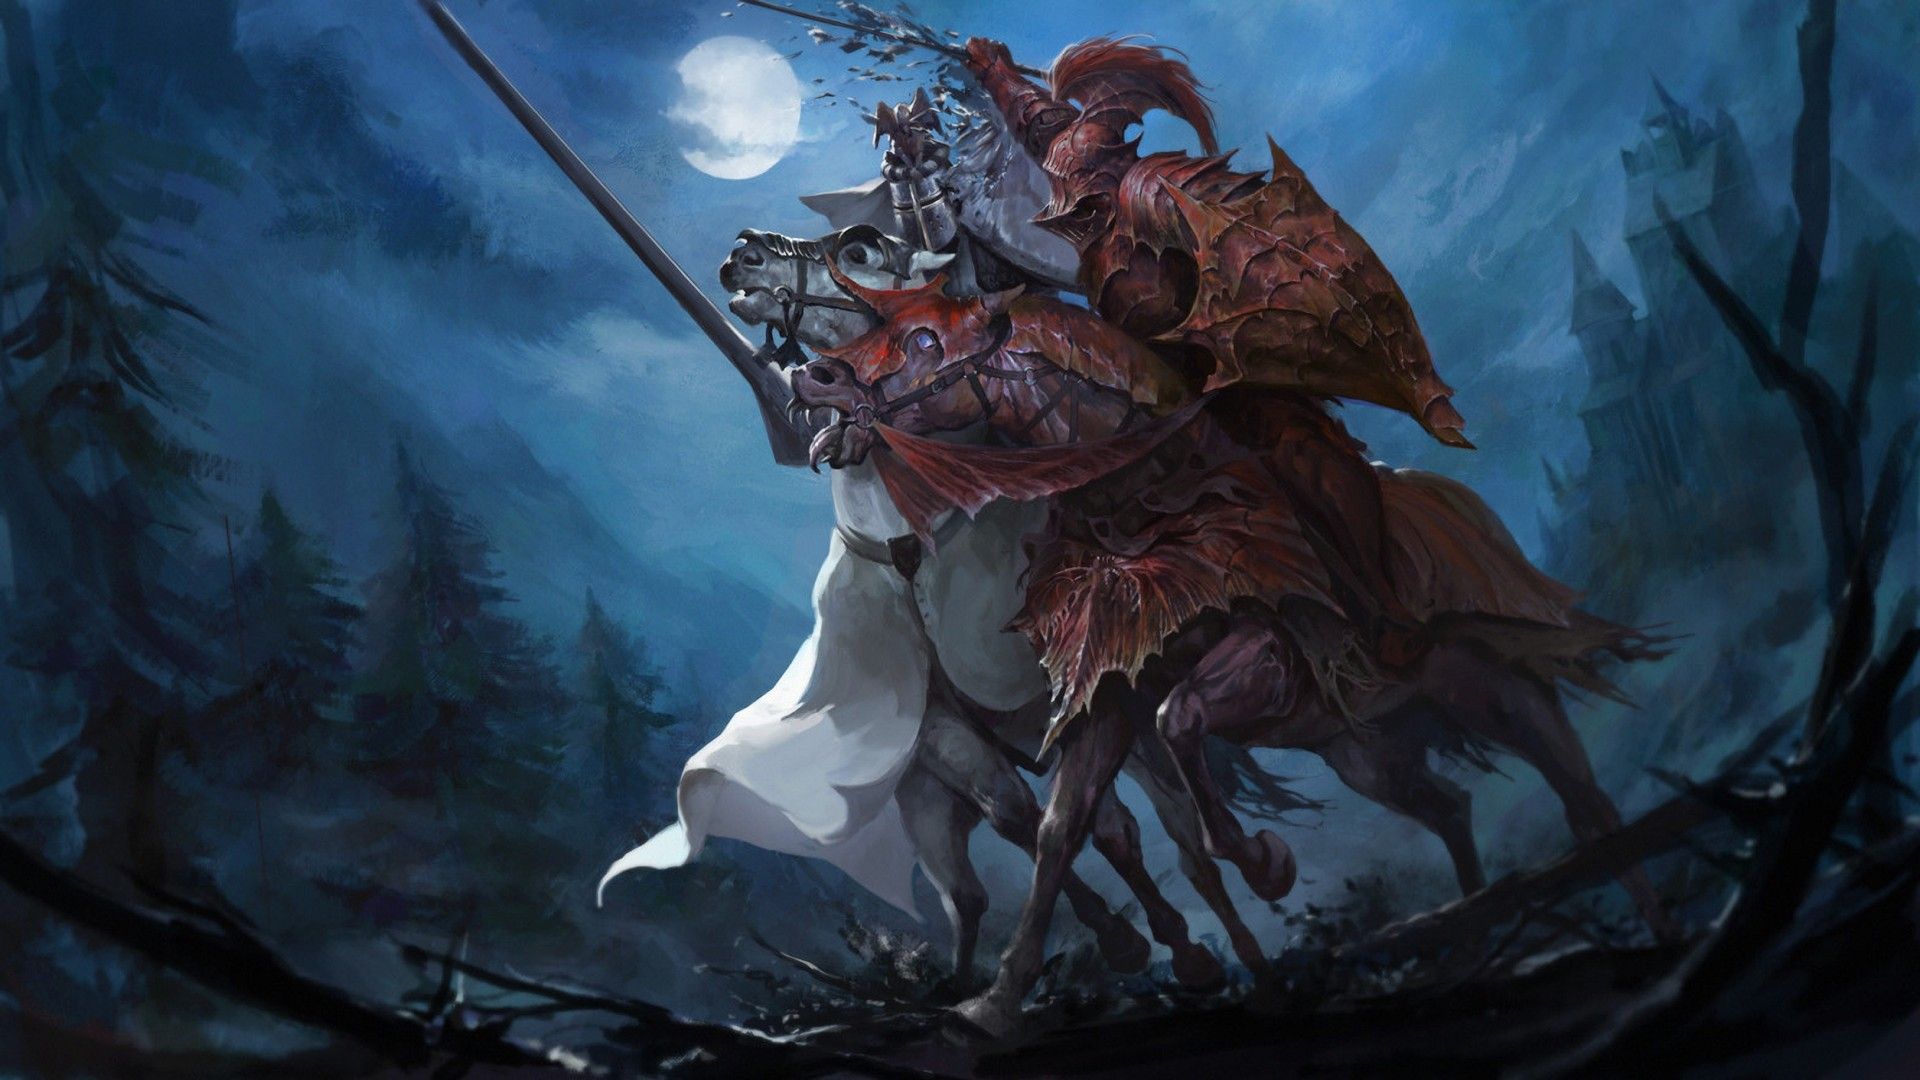 knight, Total War: Warhammer, WFRP, Moon, Forest, Night, Horse, Lance, Sword, Shield Wallpaper HD / Desktop and Mobile Background